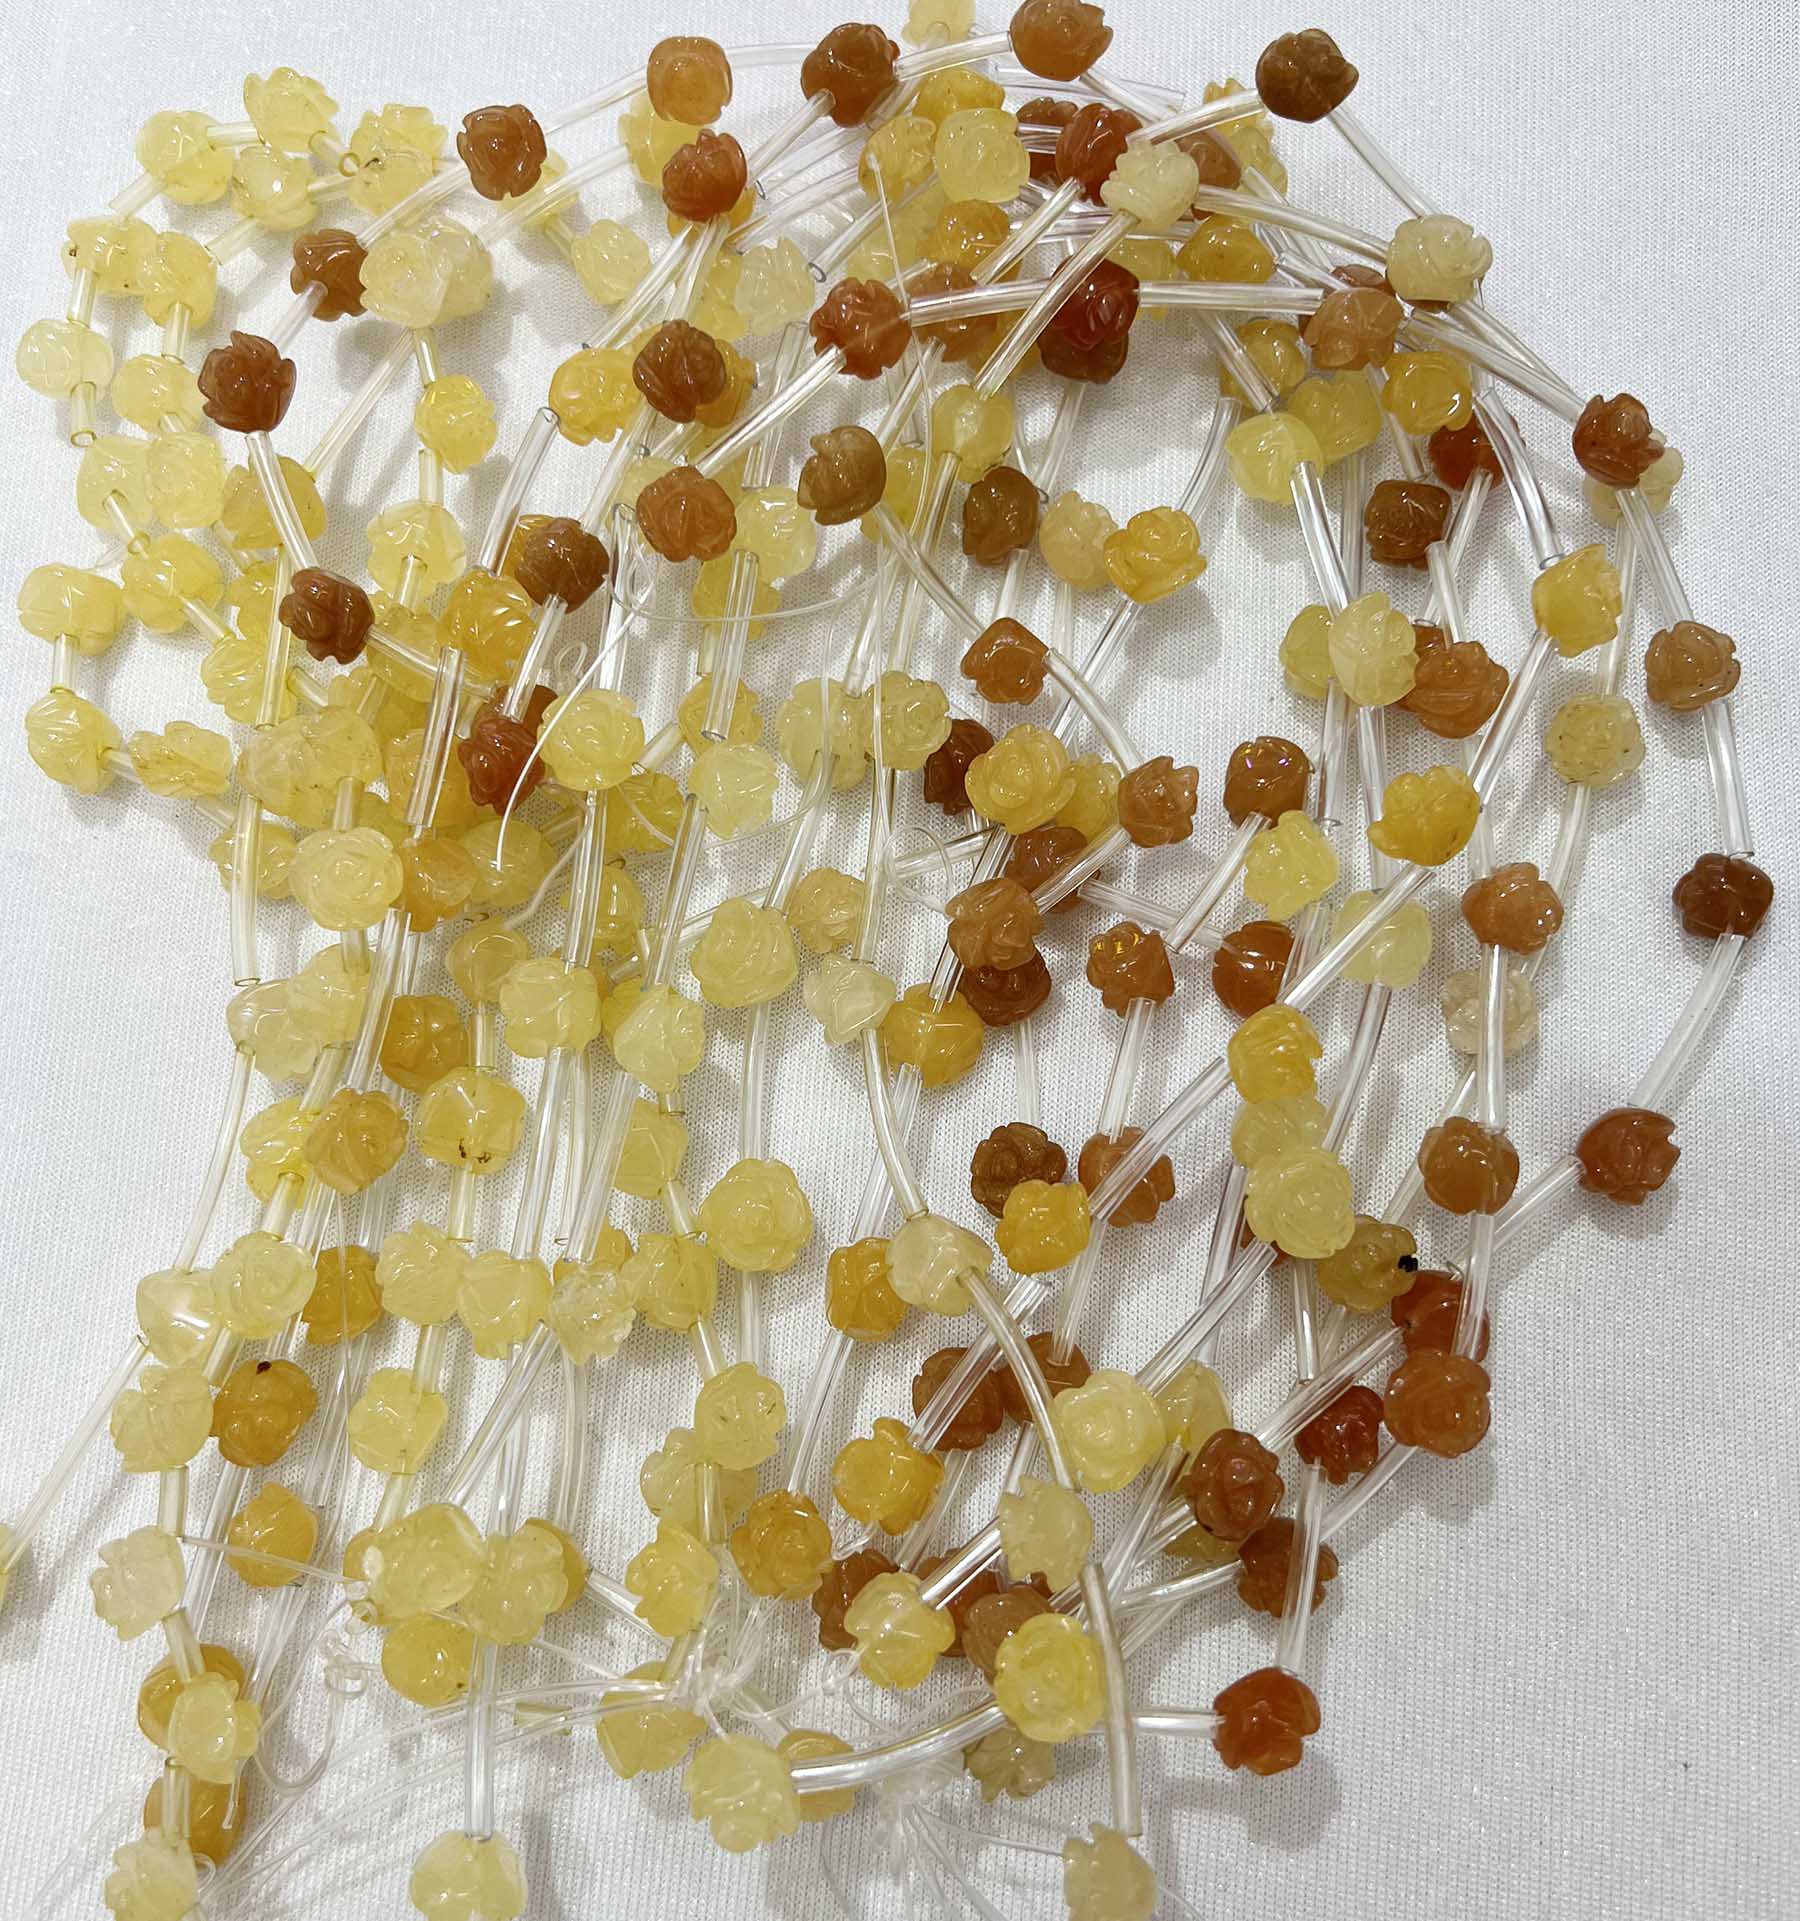 Flowers Of Natural Stones Yellow Jade Attractting For Necklaces Bracelets Earrings